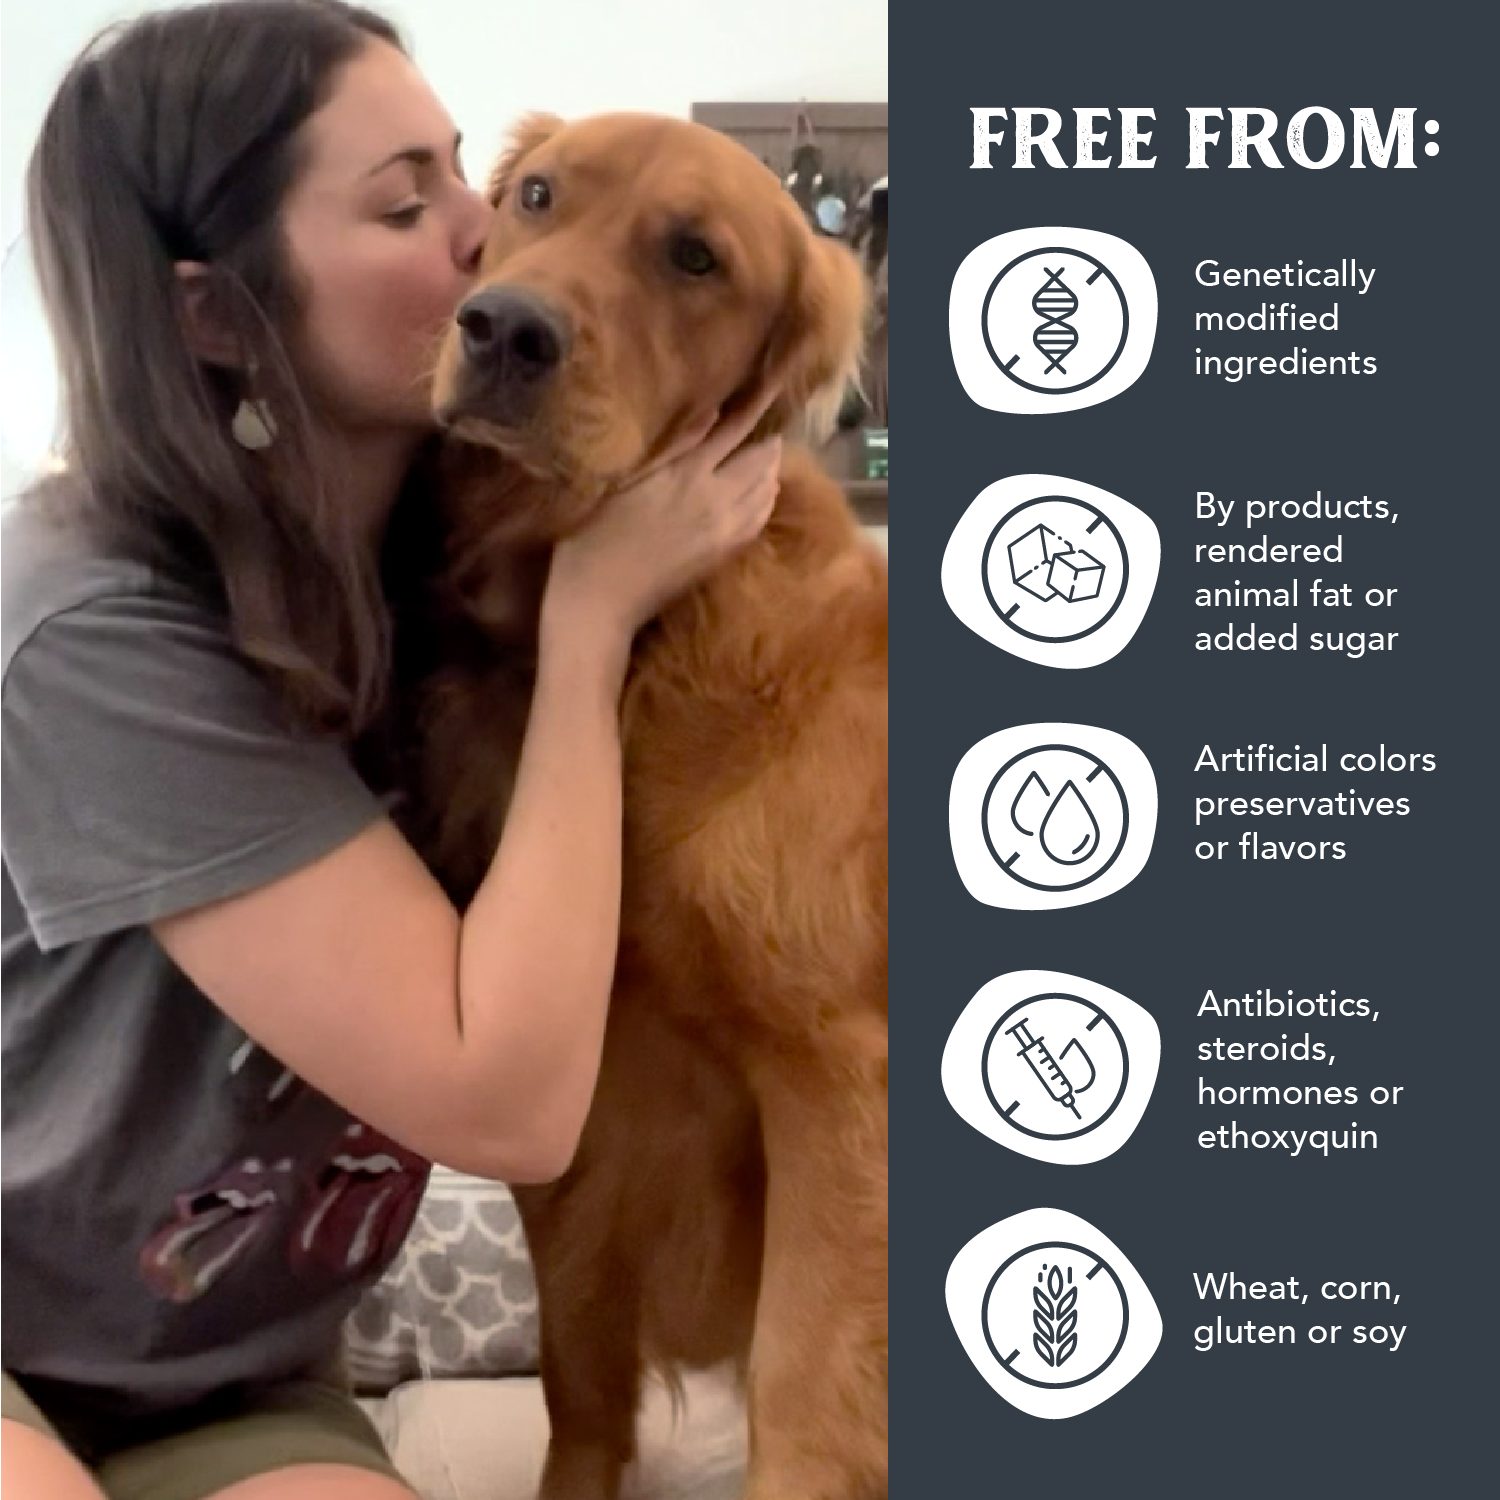 Image of a woman and golden retriever, highlighting Health Extension's 'Free From' qualities.